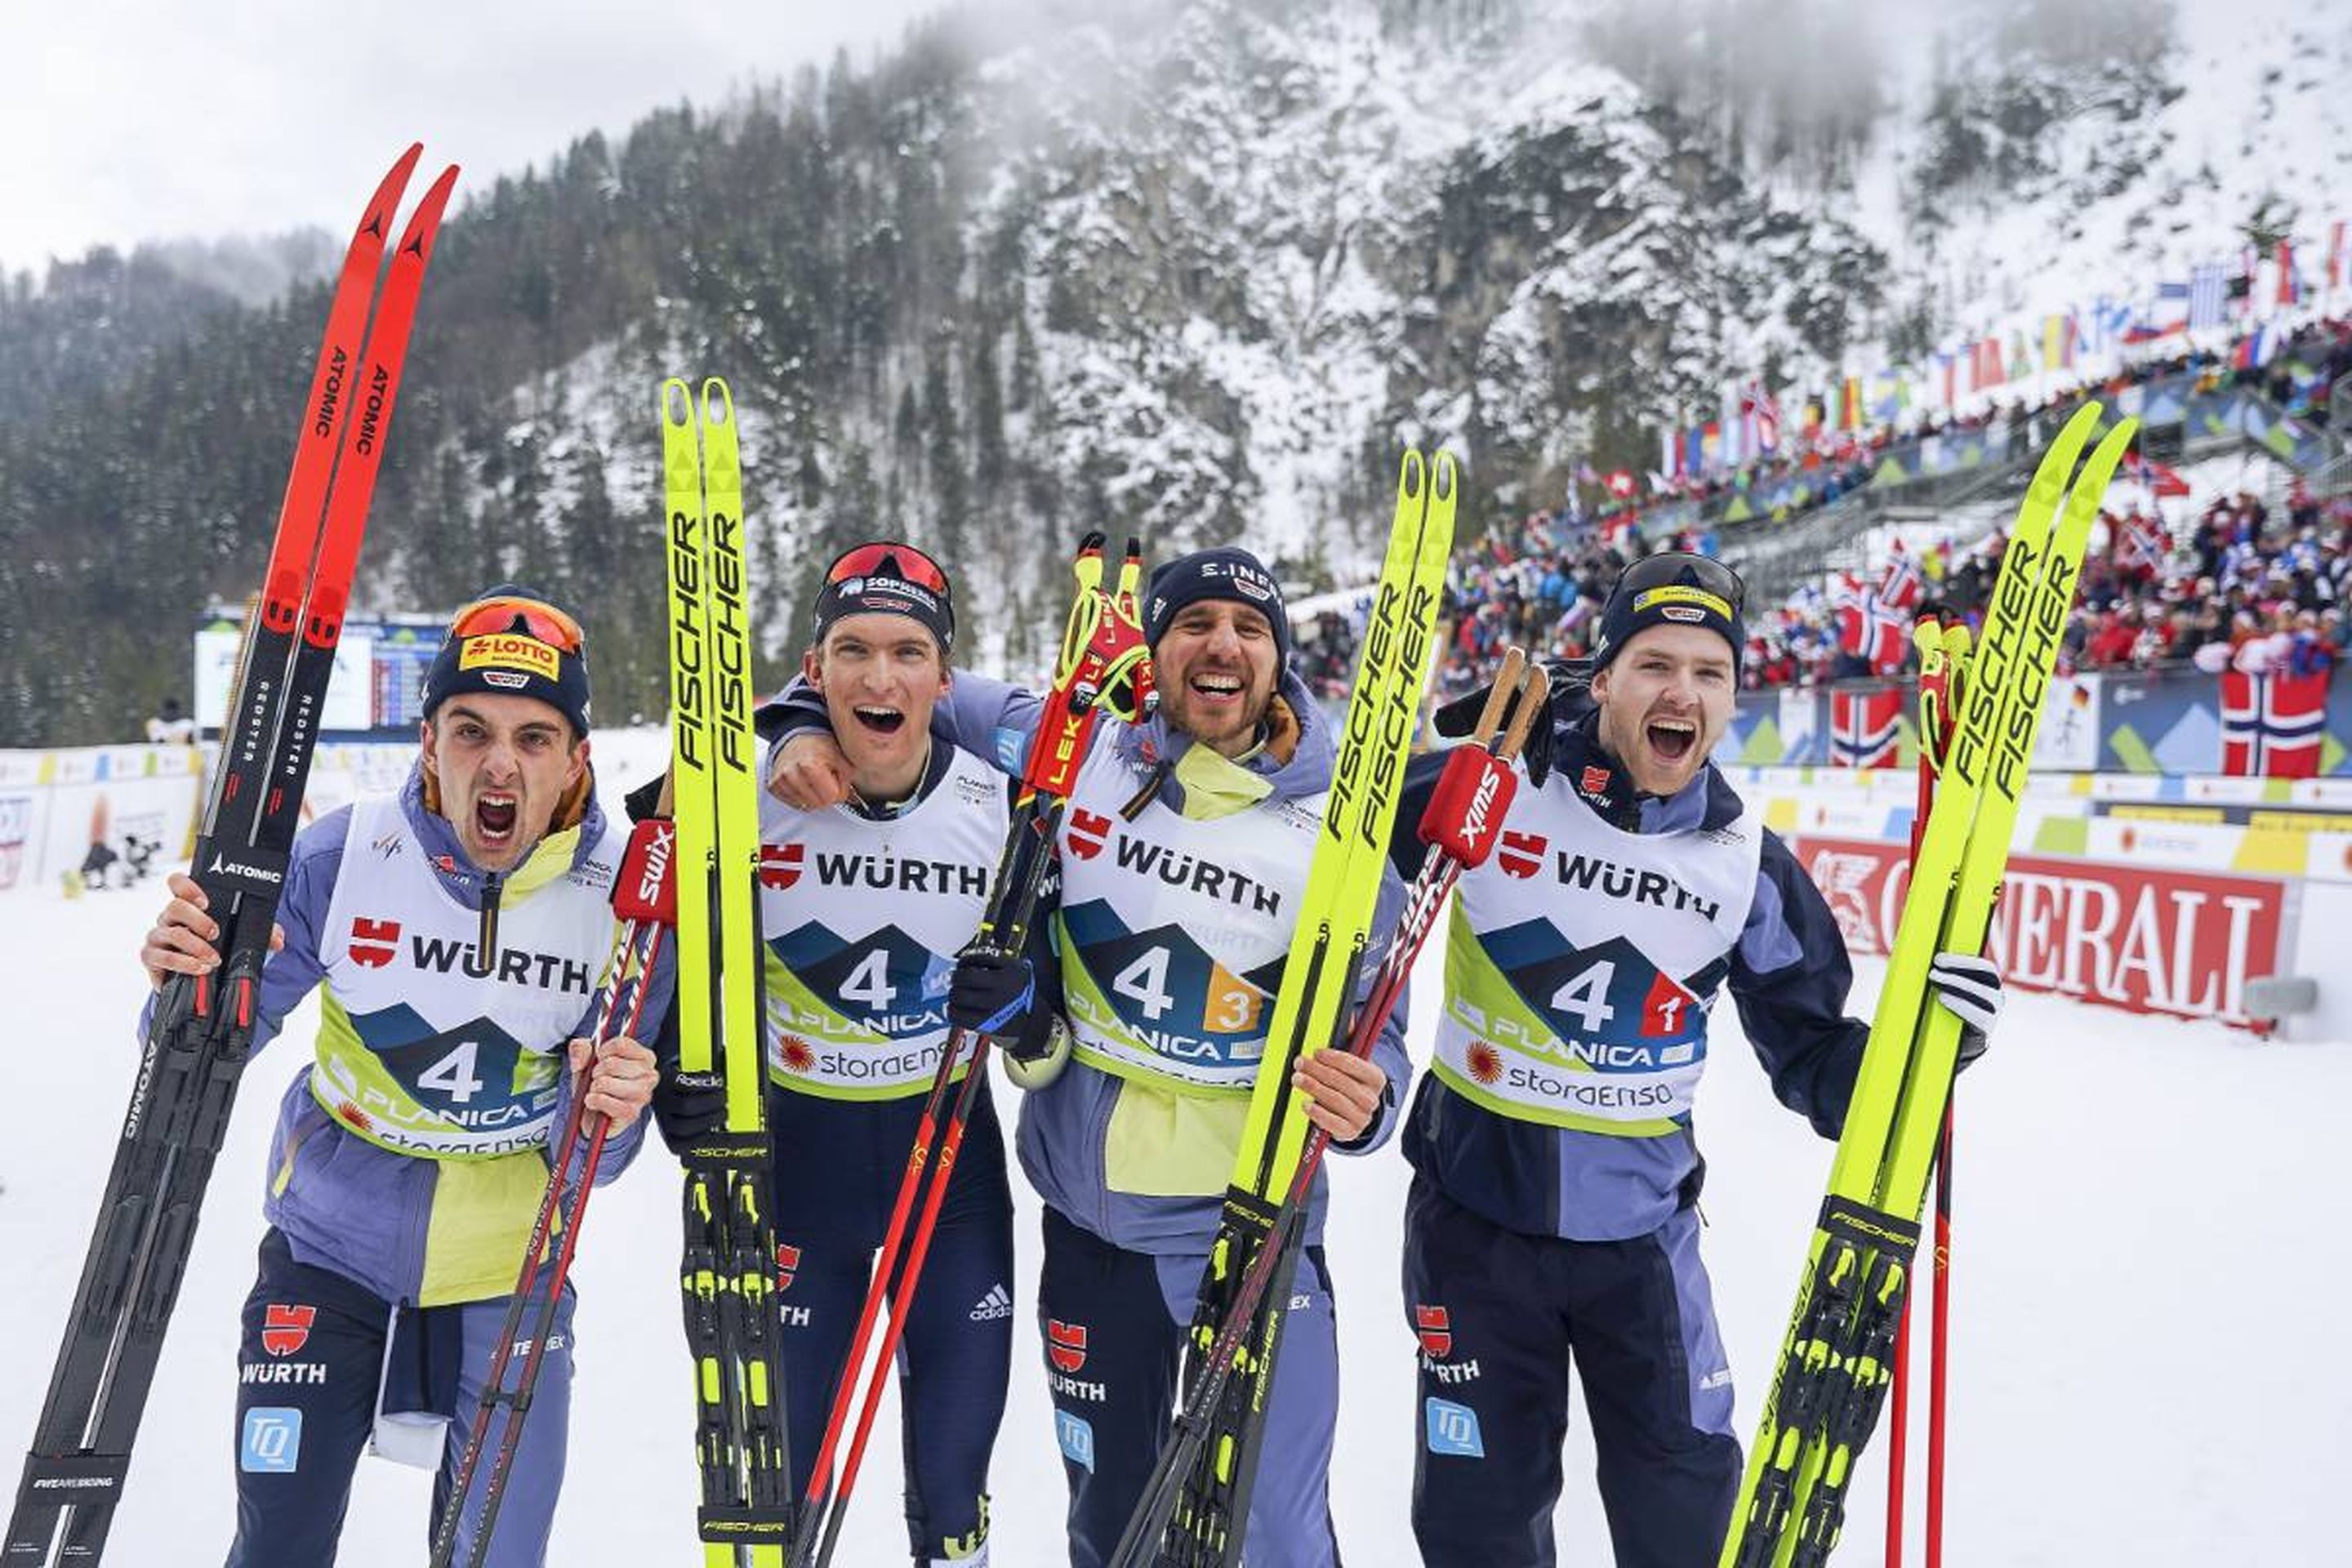 Germany celebrated their bronze medal as if it was a gold: @Nordic Focus.